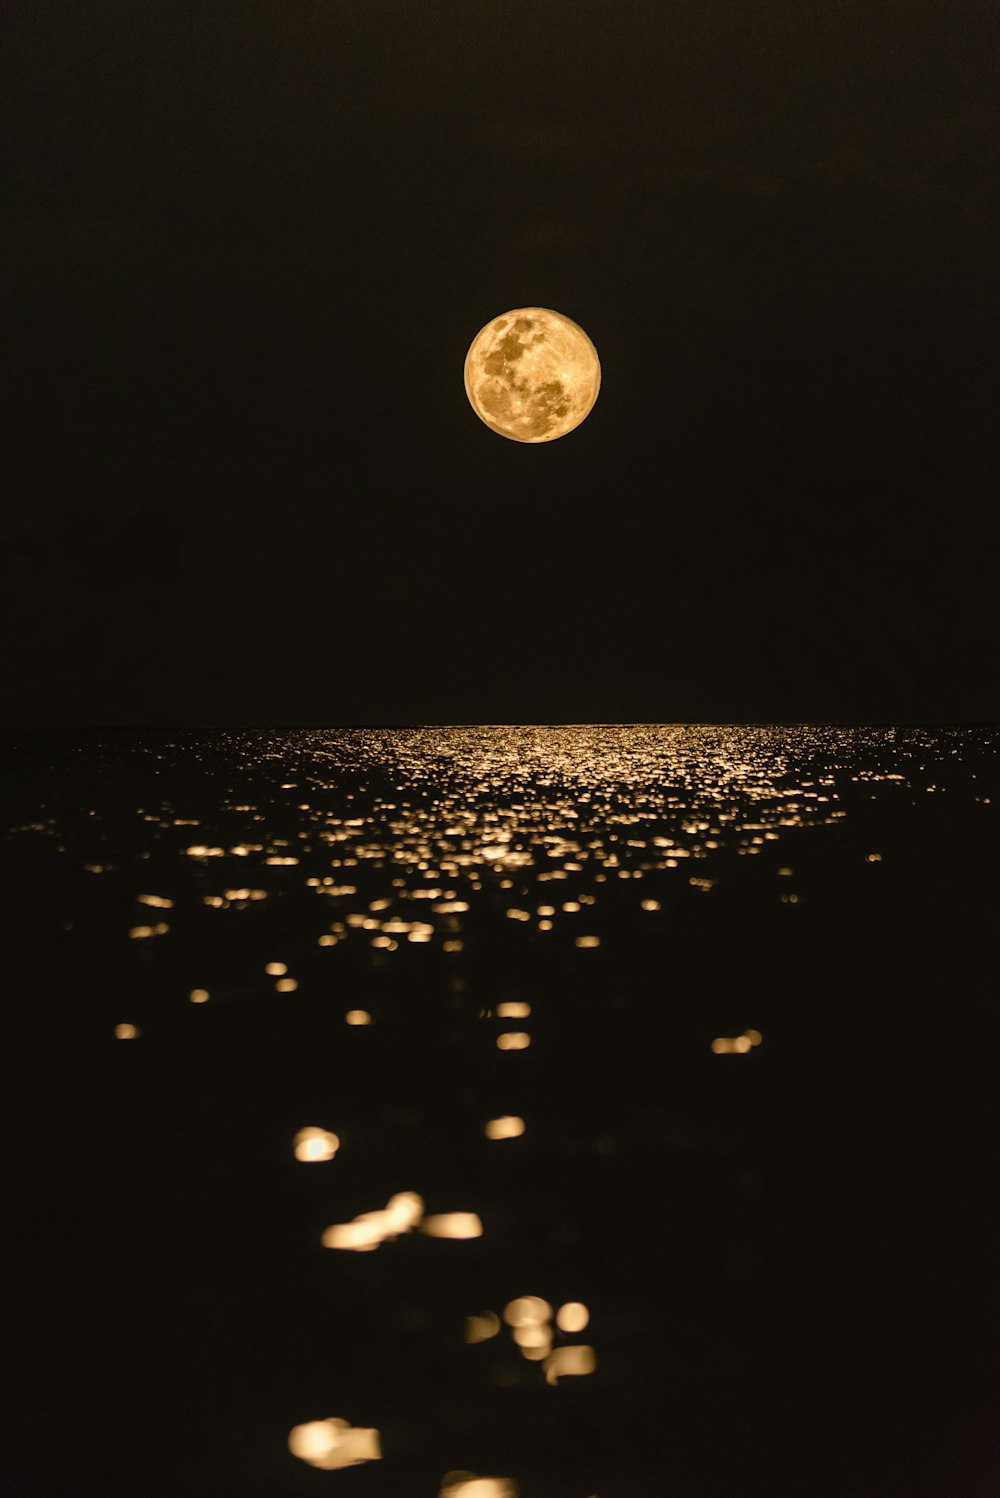 Full moon over the body of water photo – Free Moon Image on Unsplash